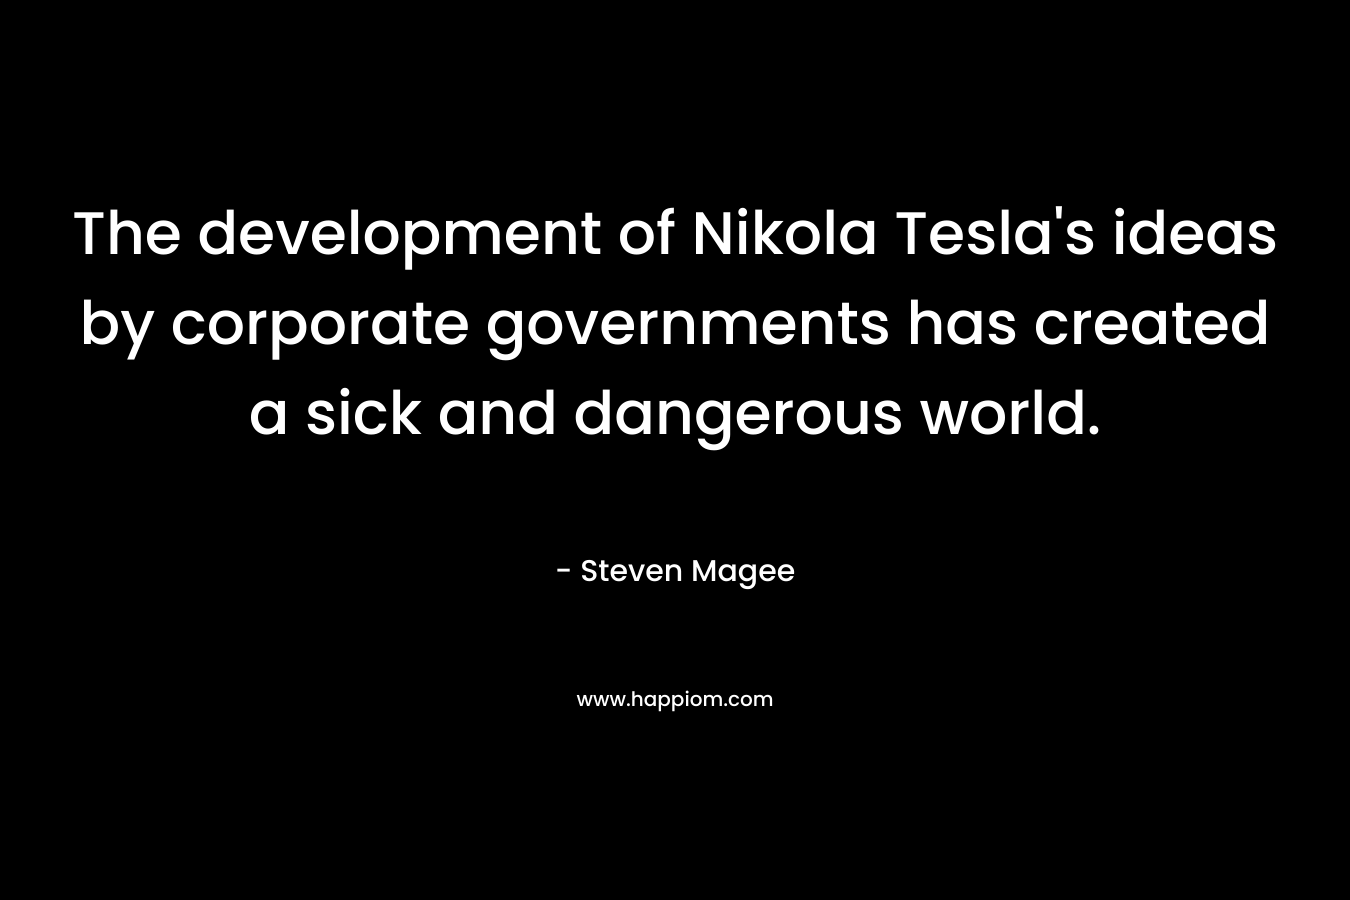 The development of Nikola Tesla's ideas by corporate governments has created a sick and dangerous world.